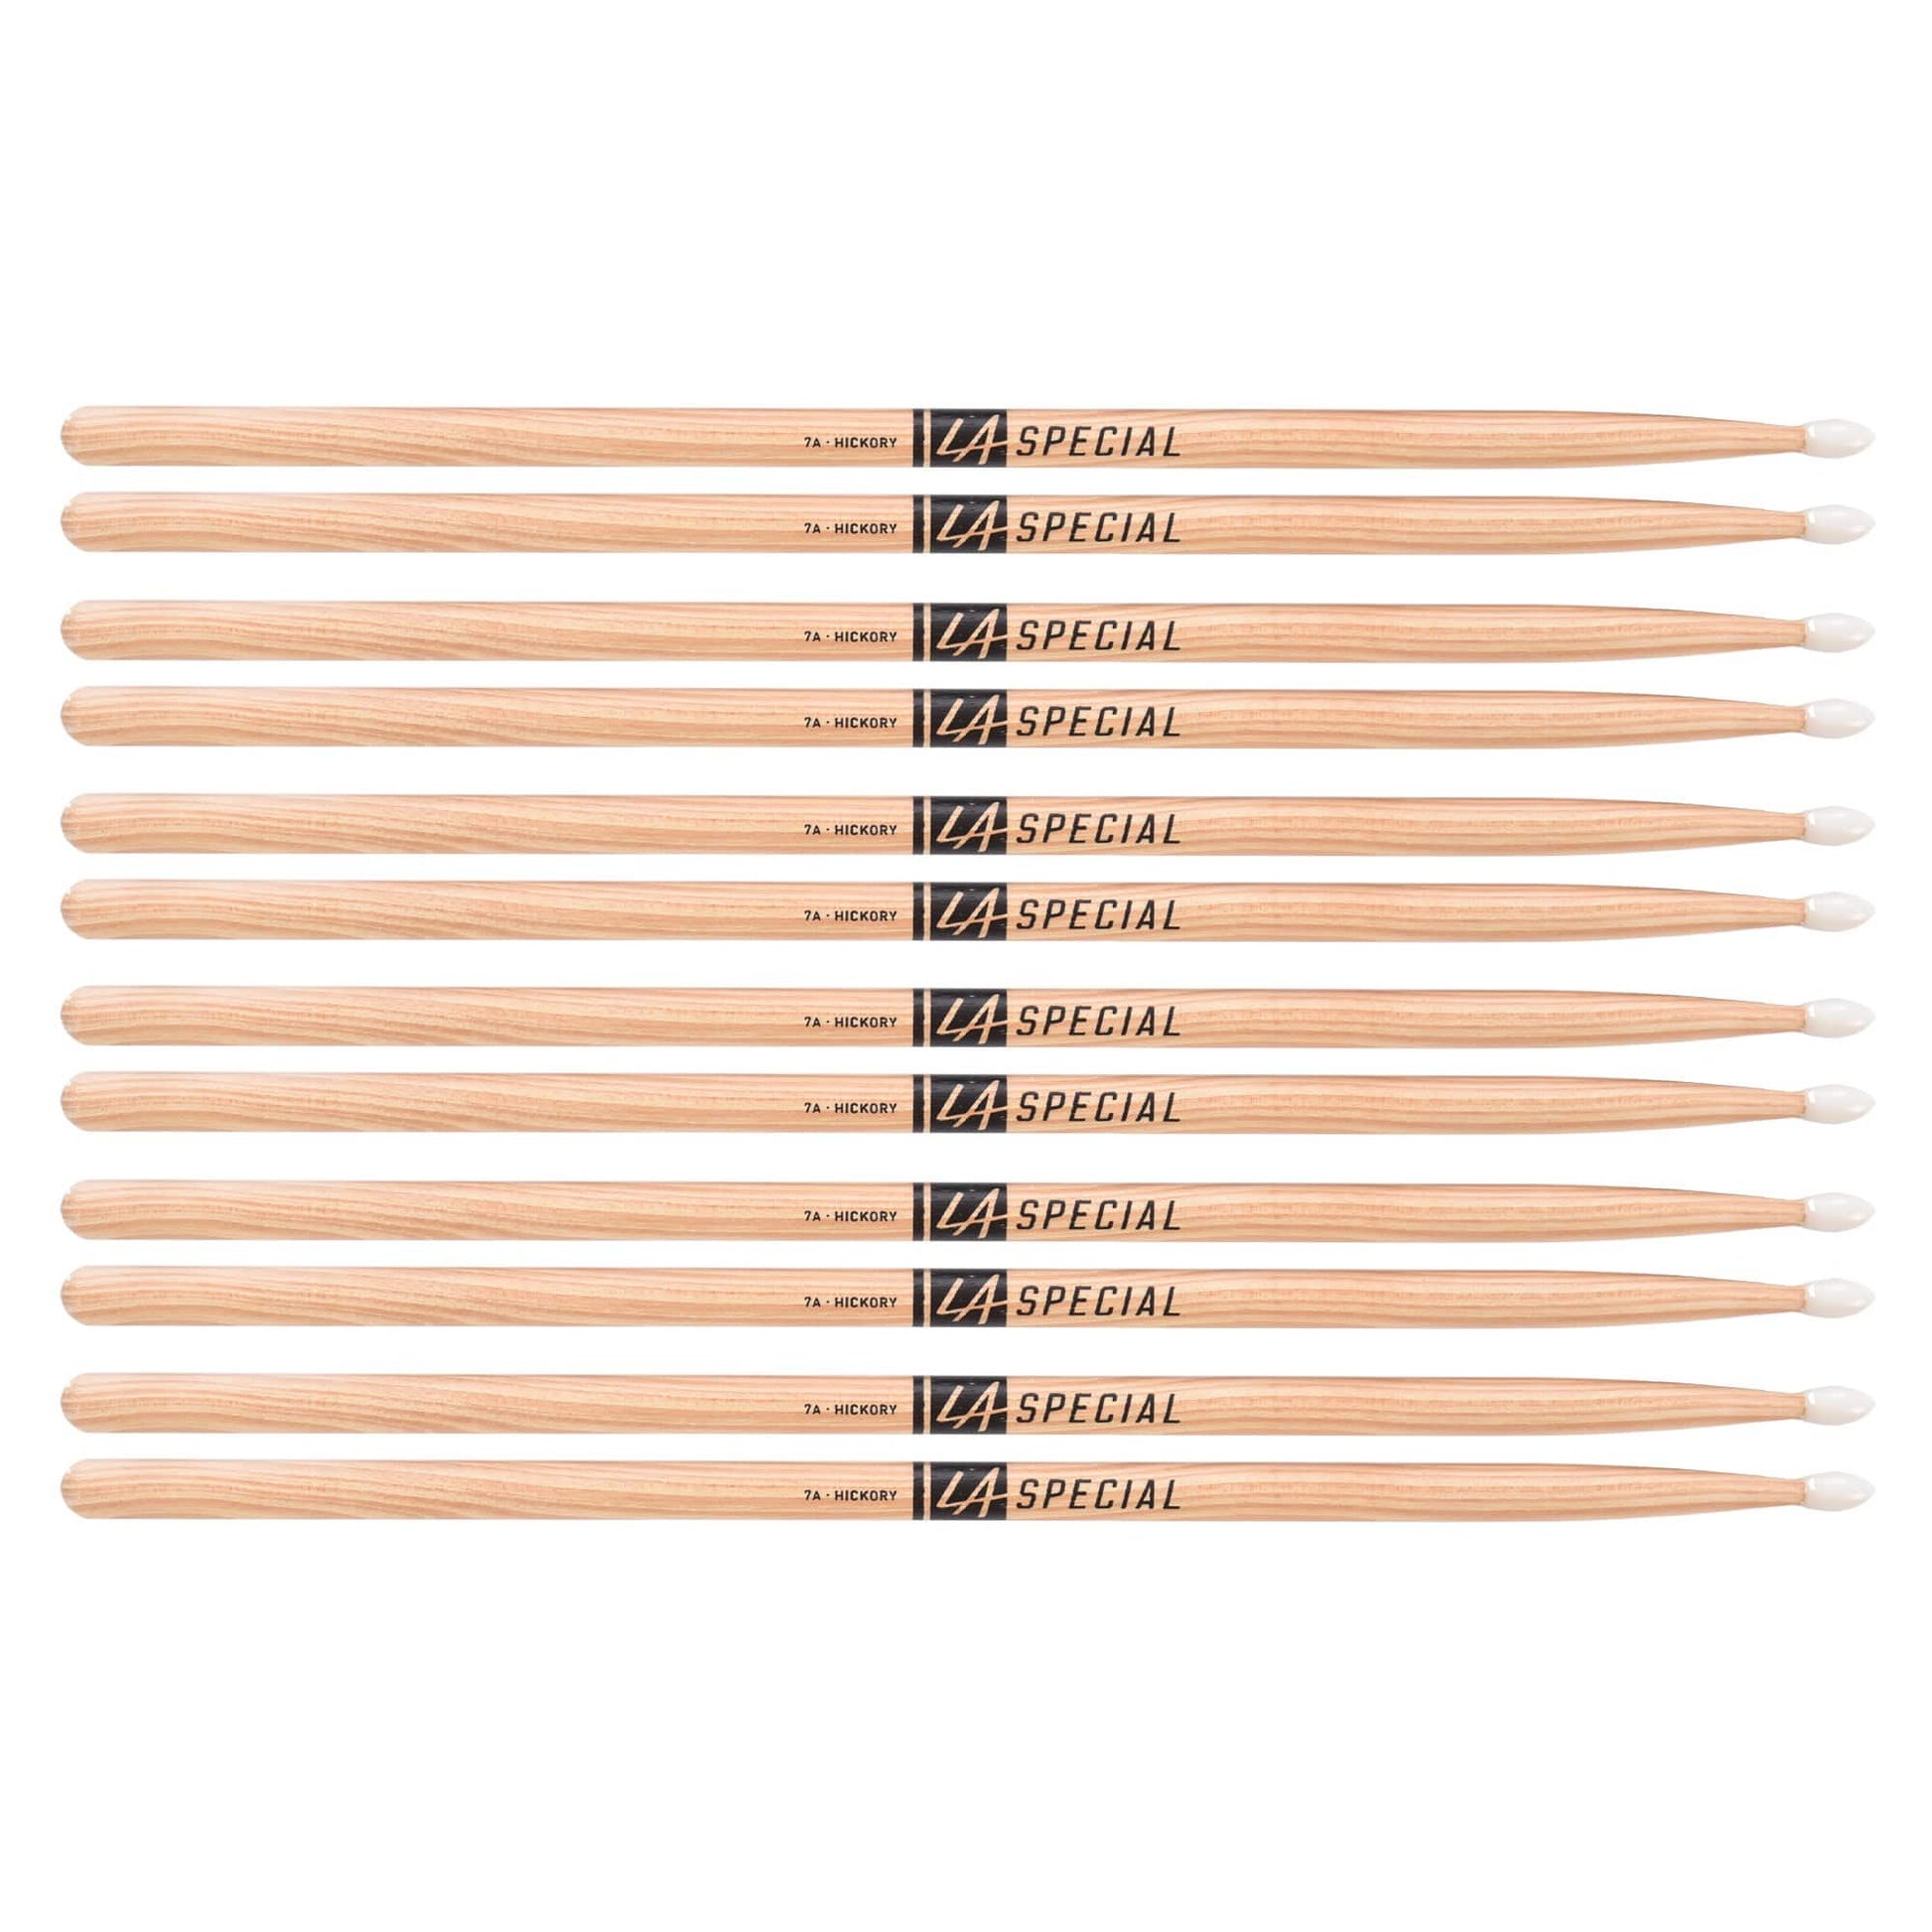 Promark LA Special 7A Nylon Tip Drum Sticks (6 Pair Bundle) Drums and Percussion / Parts and Accessories / Drum Sticks and Mallets